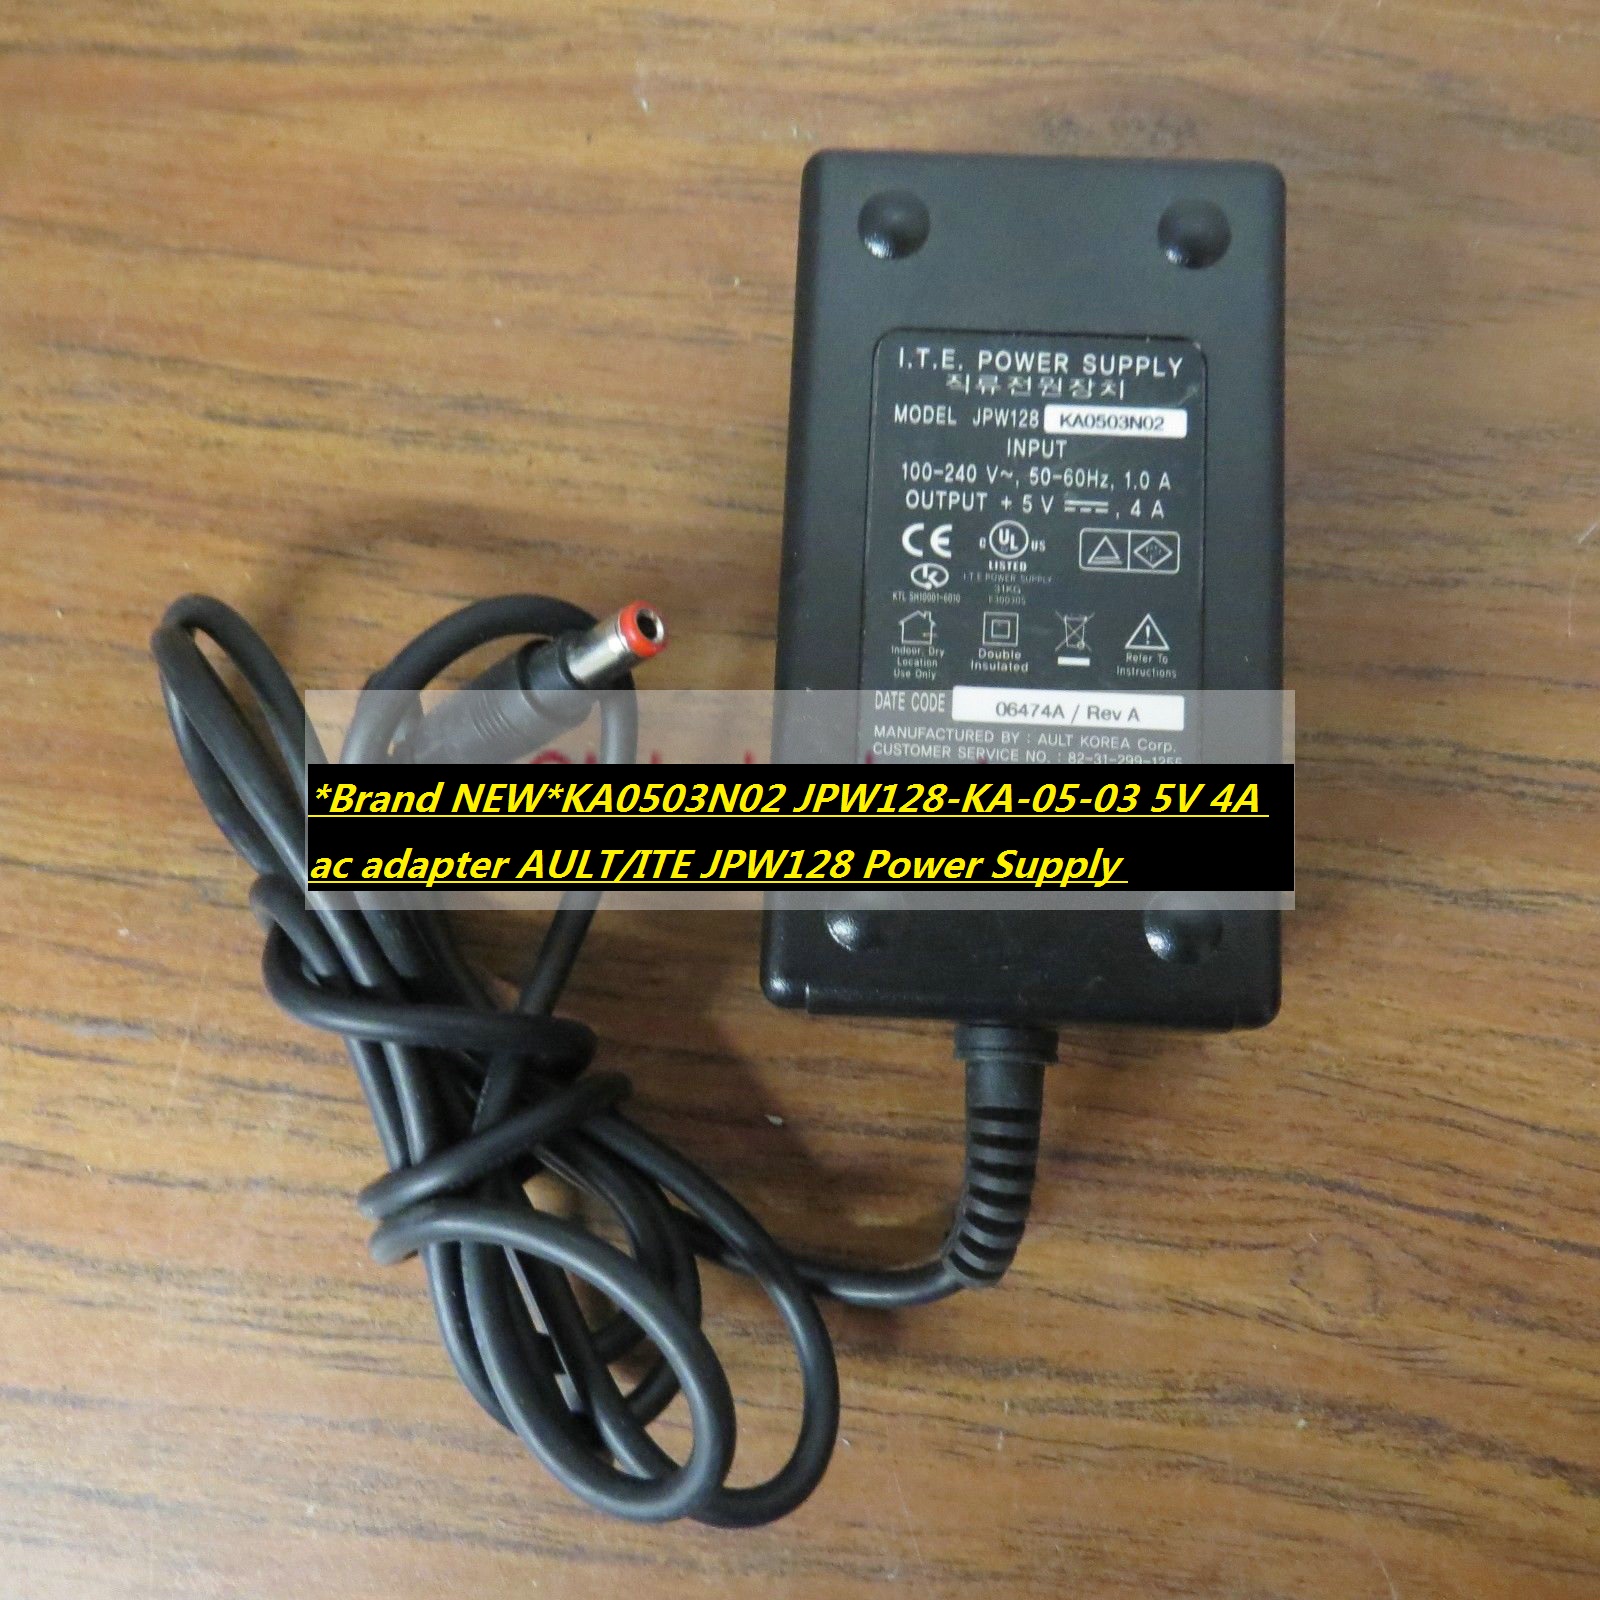 *Brand NEW*KA0503N02 JPW128-KA-05-03 5V 4A ac adapter 5.5*2.5mm with power cord AULT/ITE JPW128 Power Supply